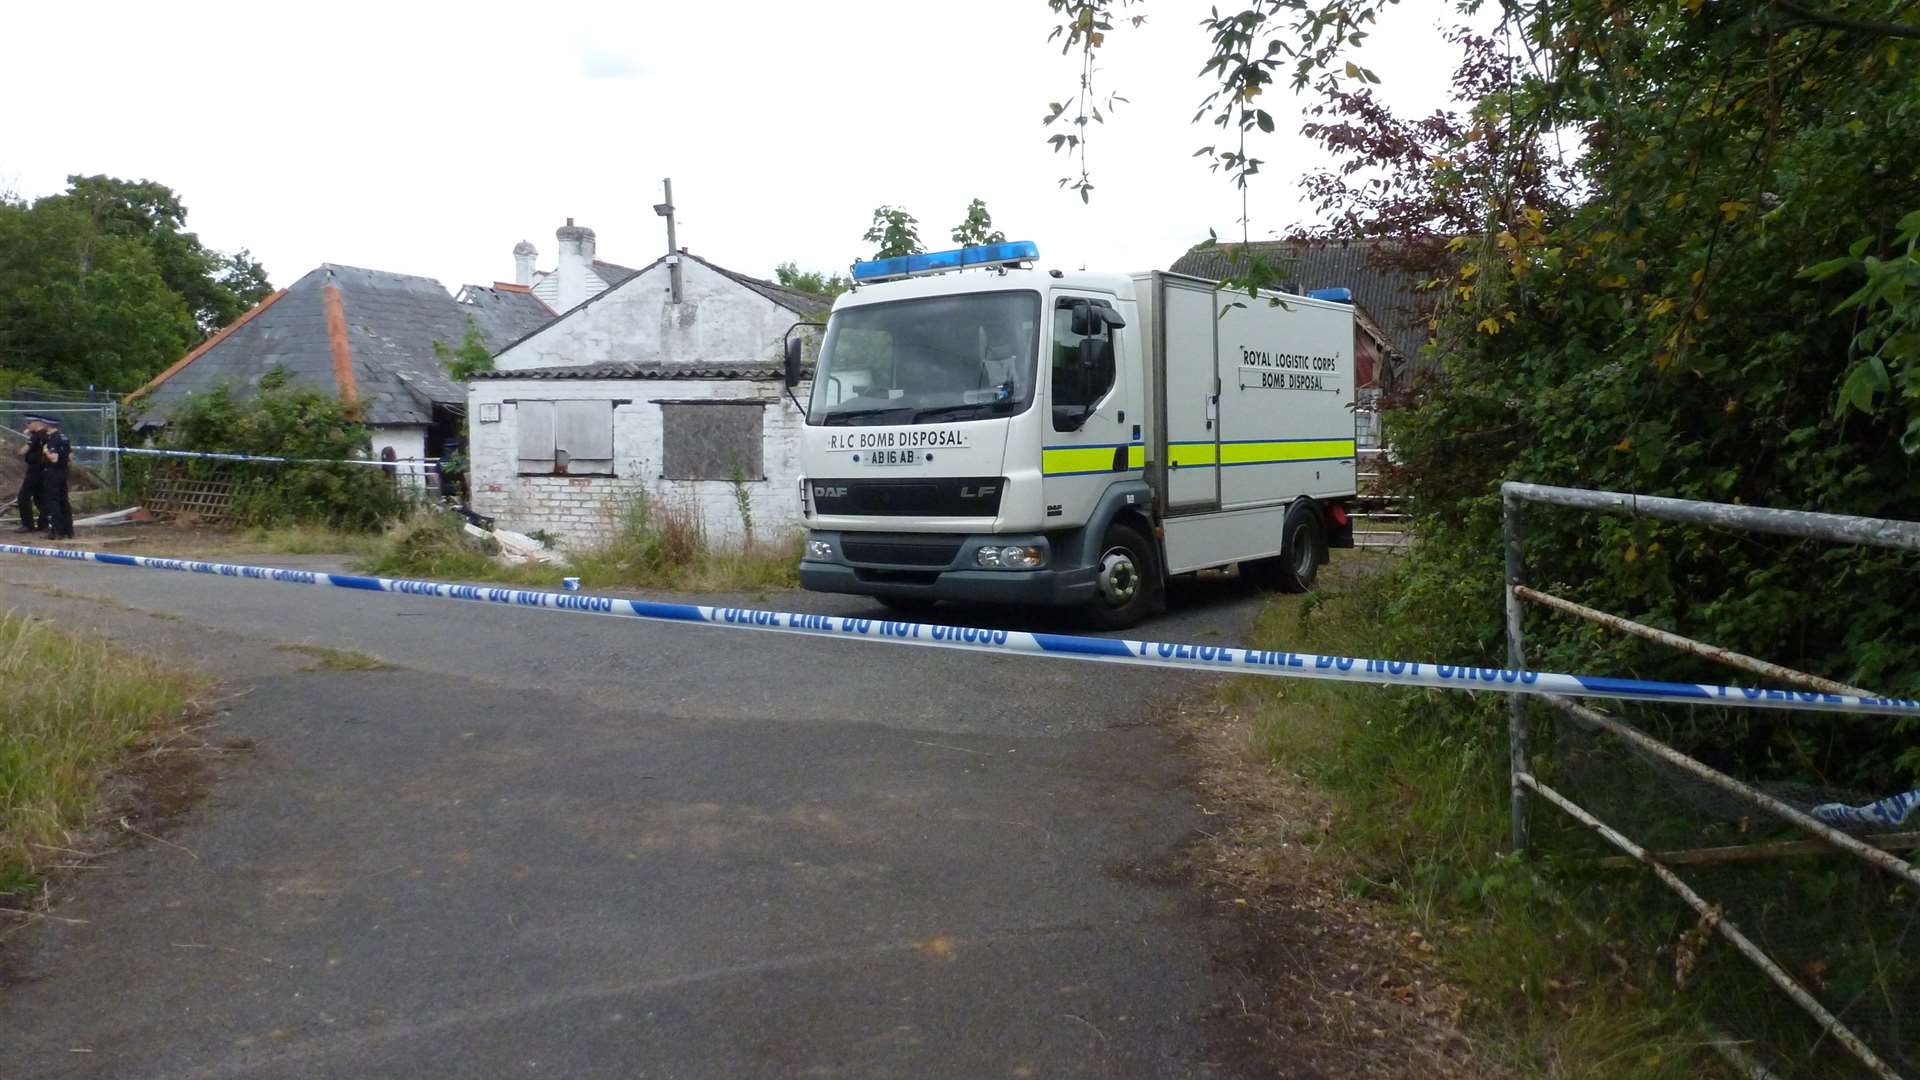 Bomb disposal experts from the Royal Logistics Corps were called to the Blacksole Bridge in Herne Bay